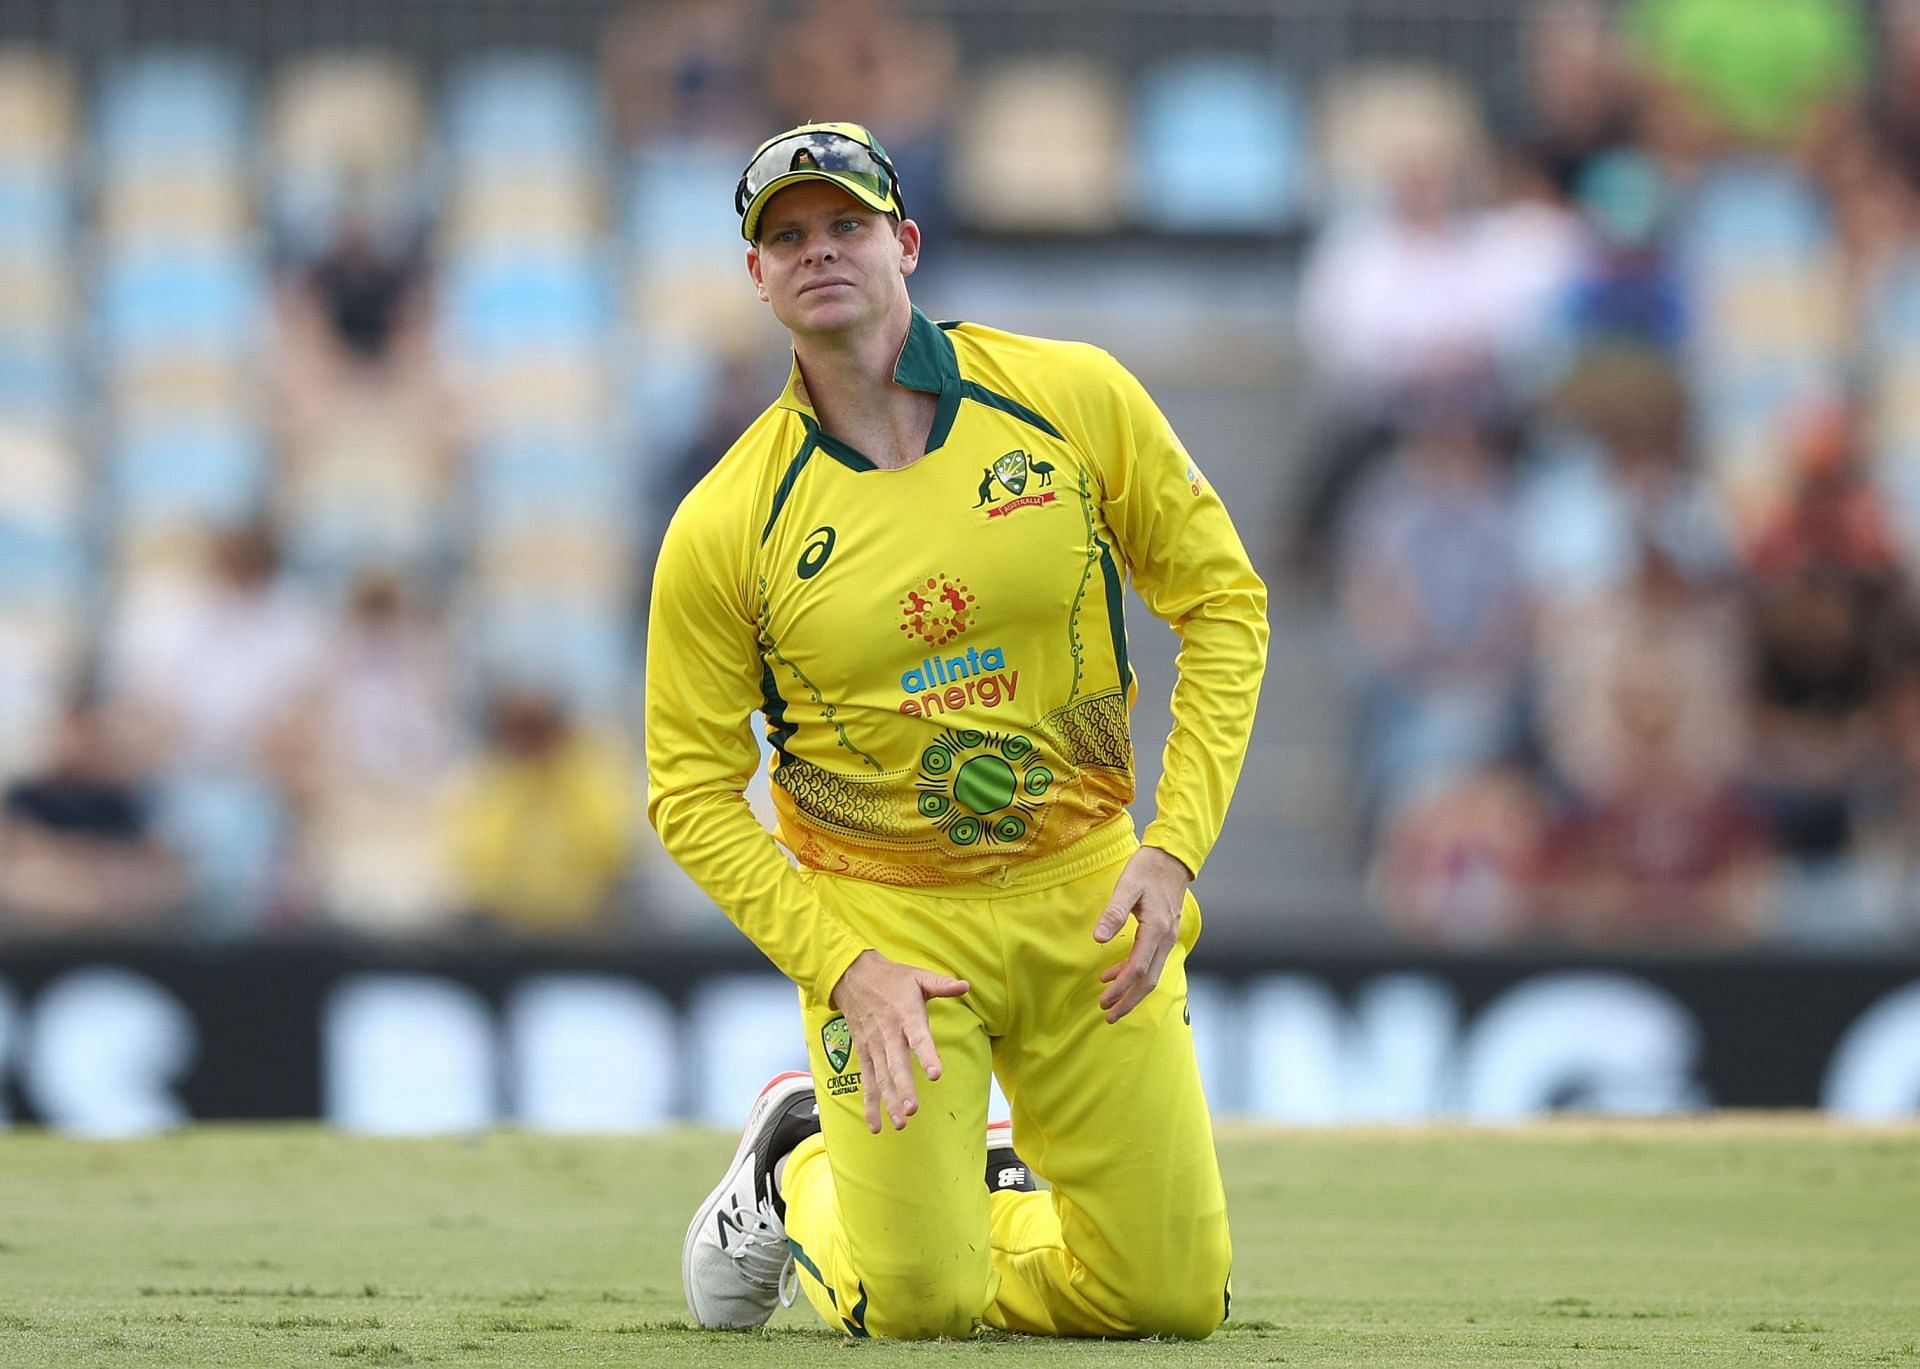 Steve Smith has the credentials to lead Australia given his prior experience in the role.